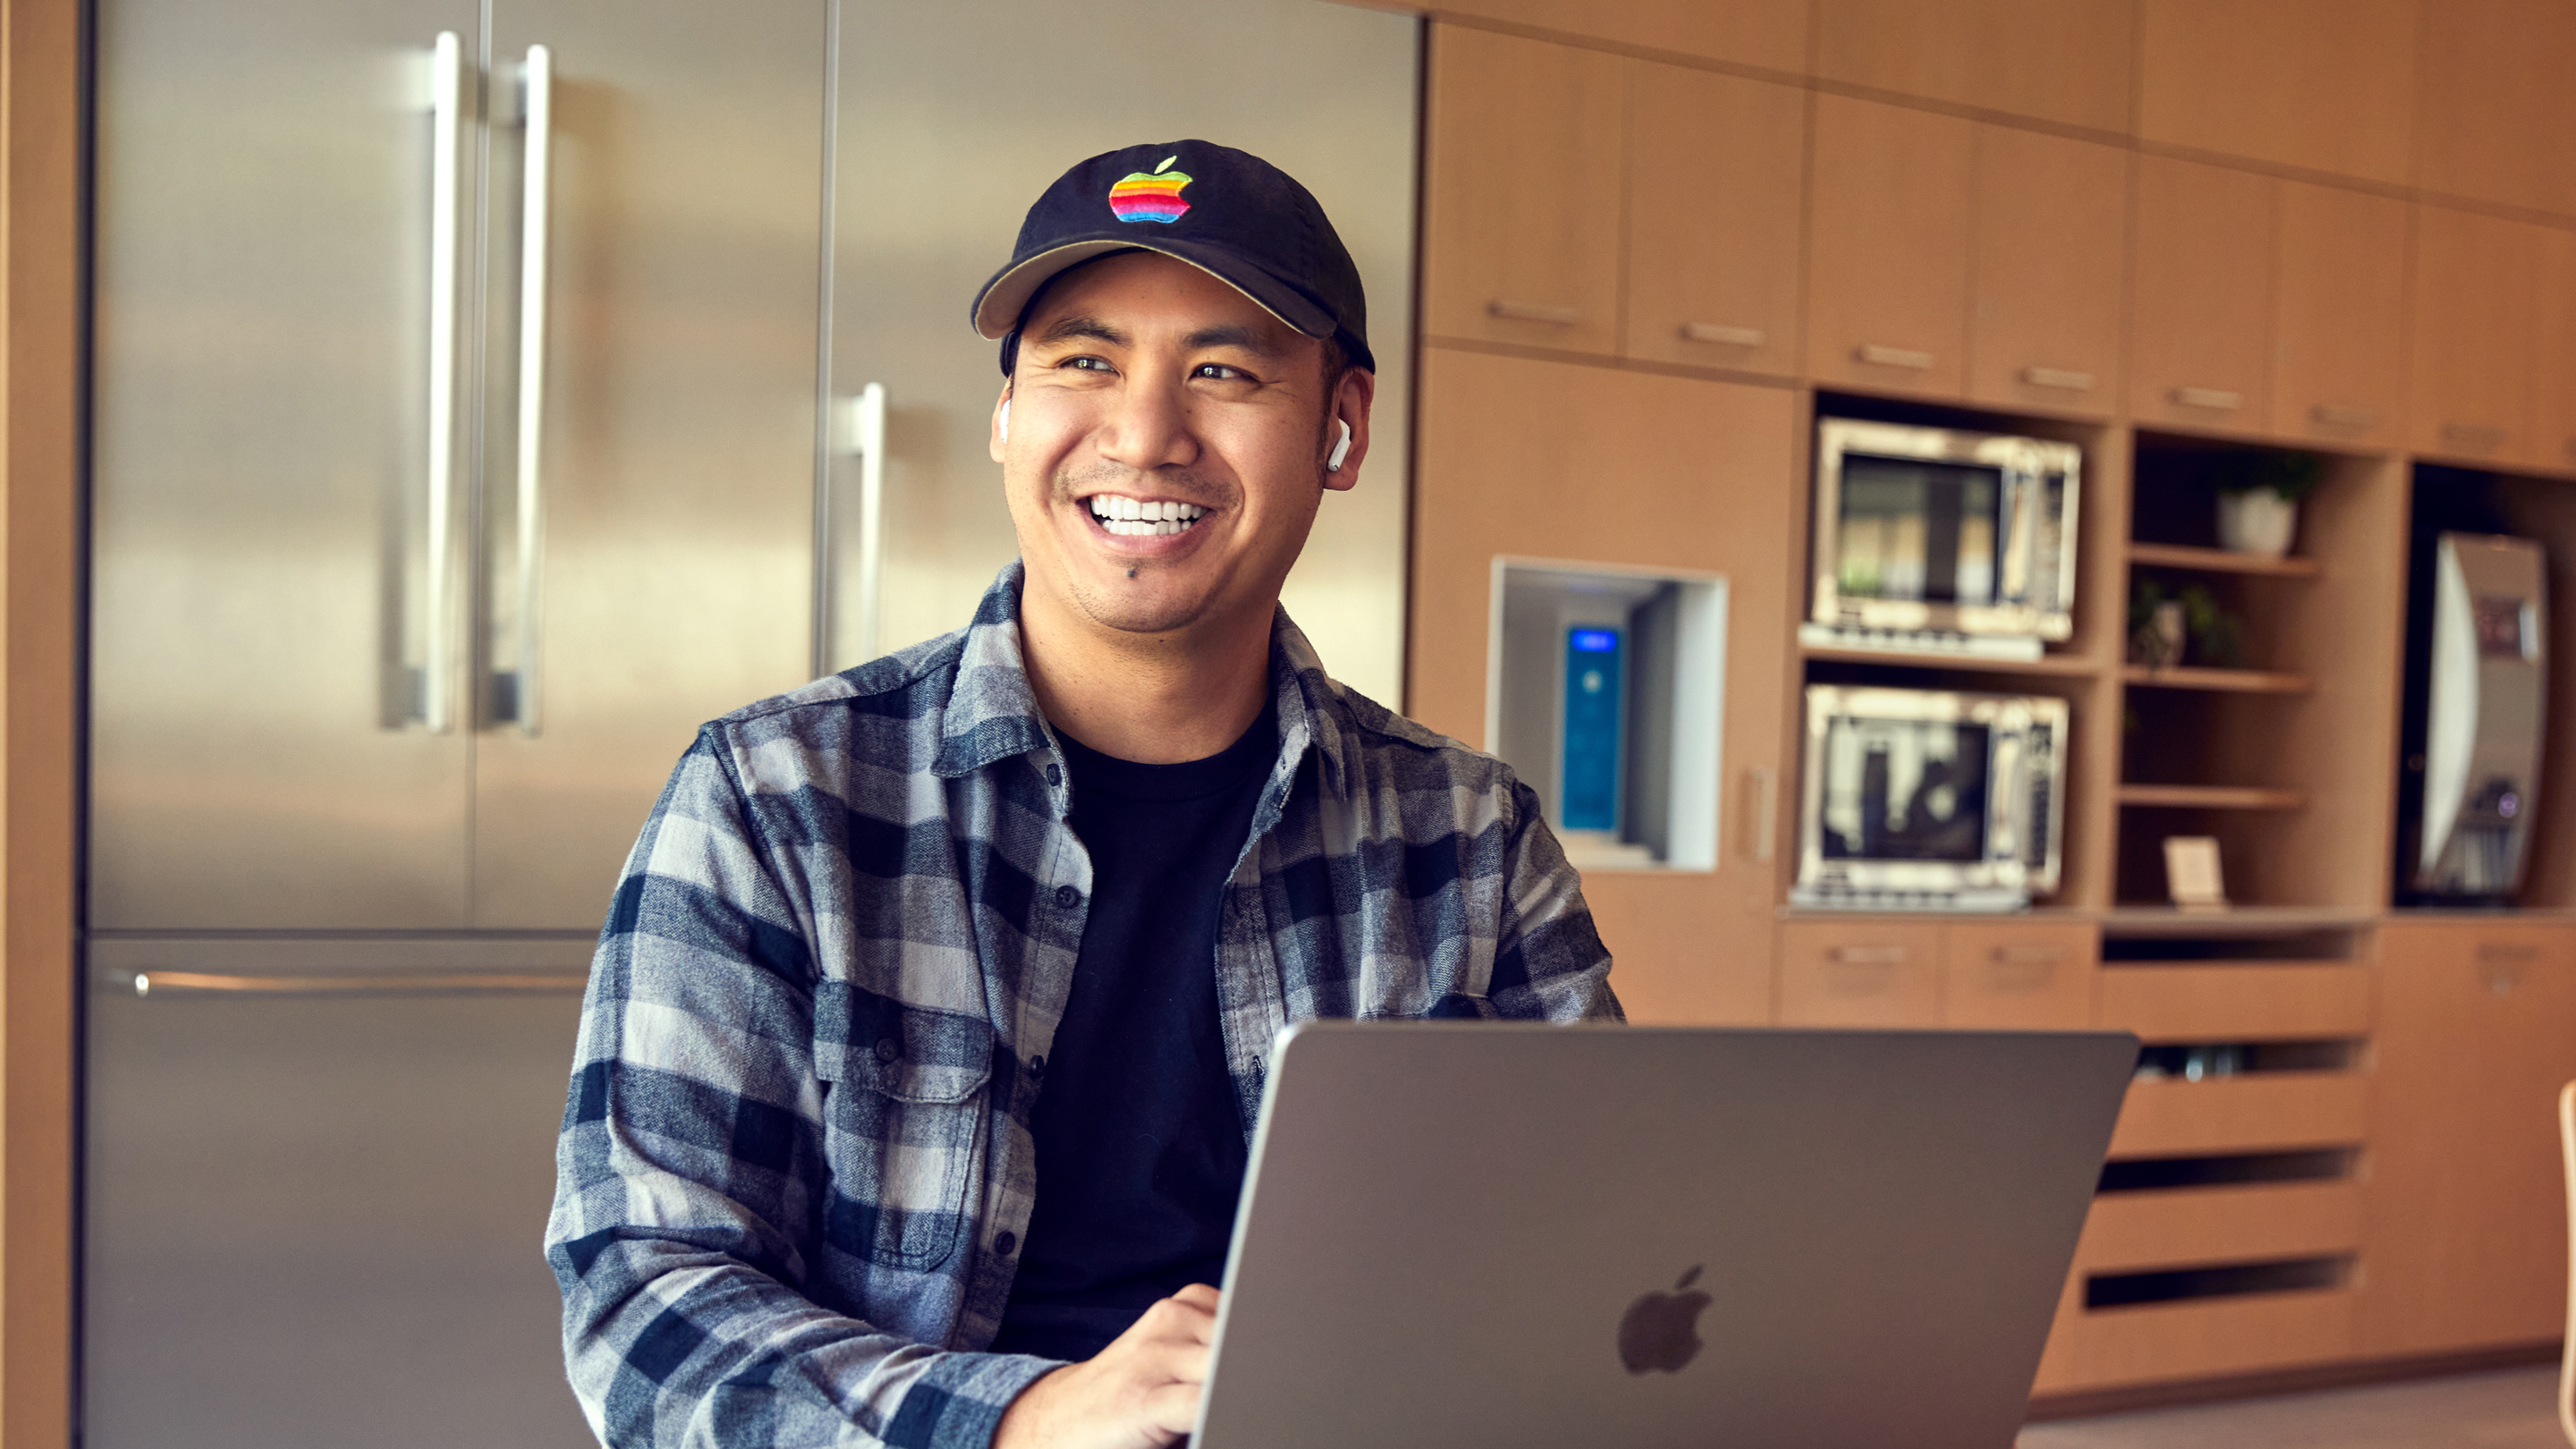 An Apple San Diego employee smiling and working on his laptop.